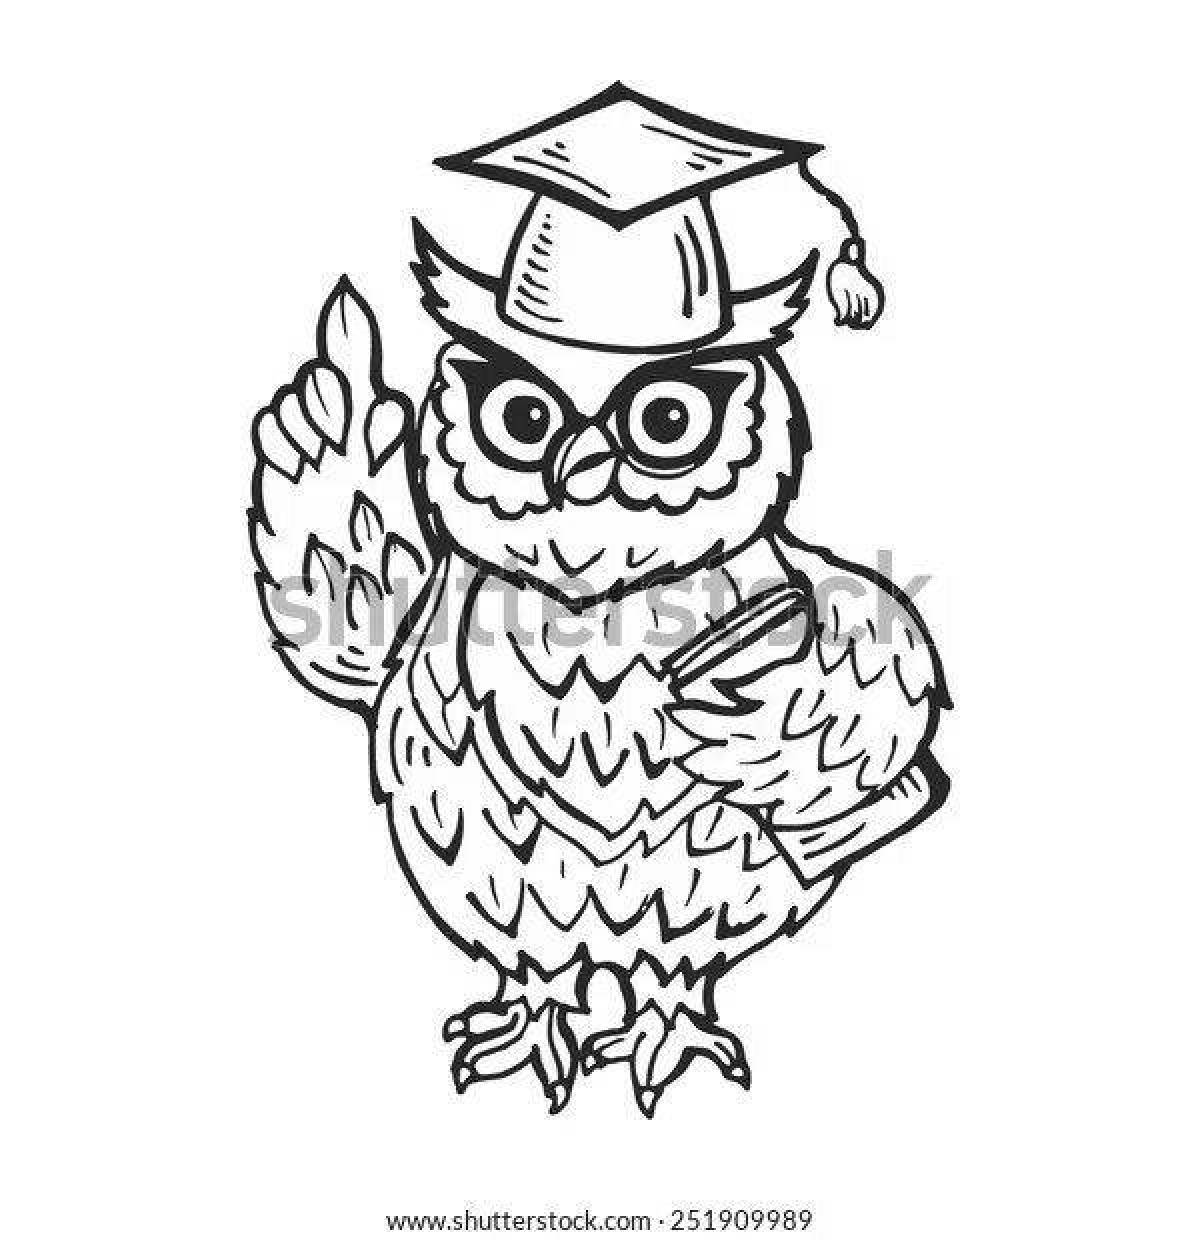 Coloring page wise owl with a globe